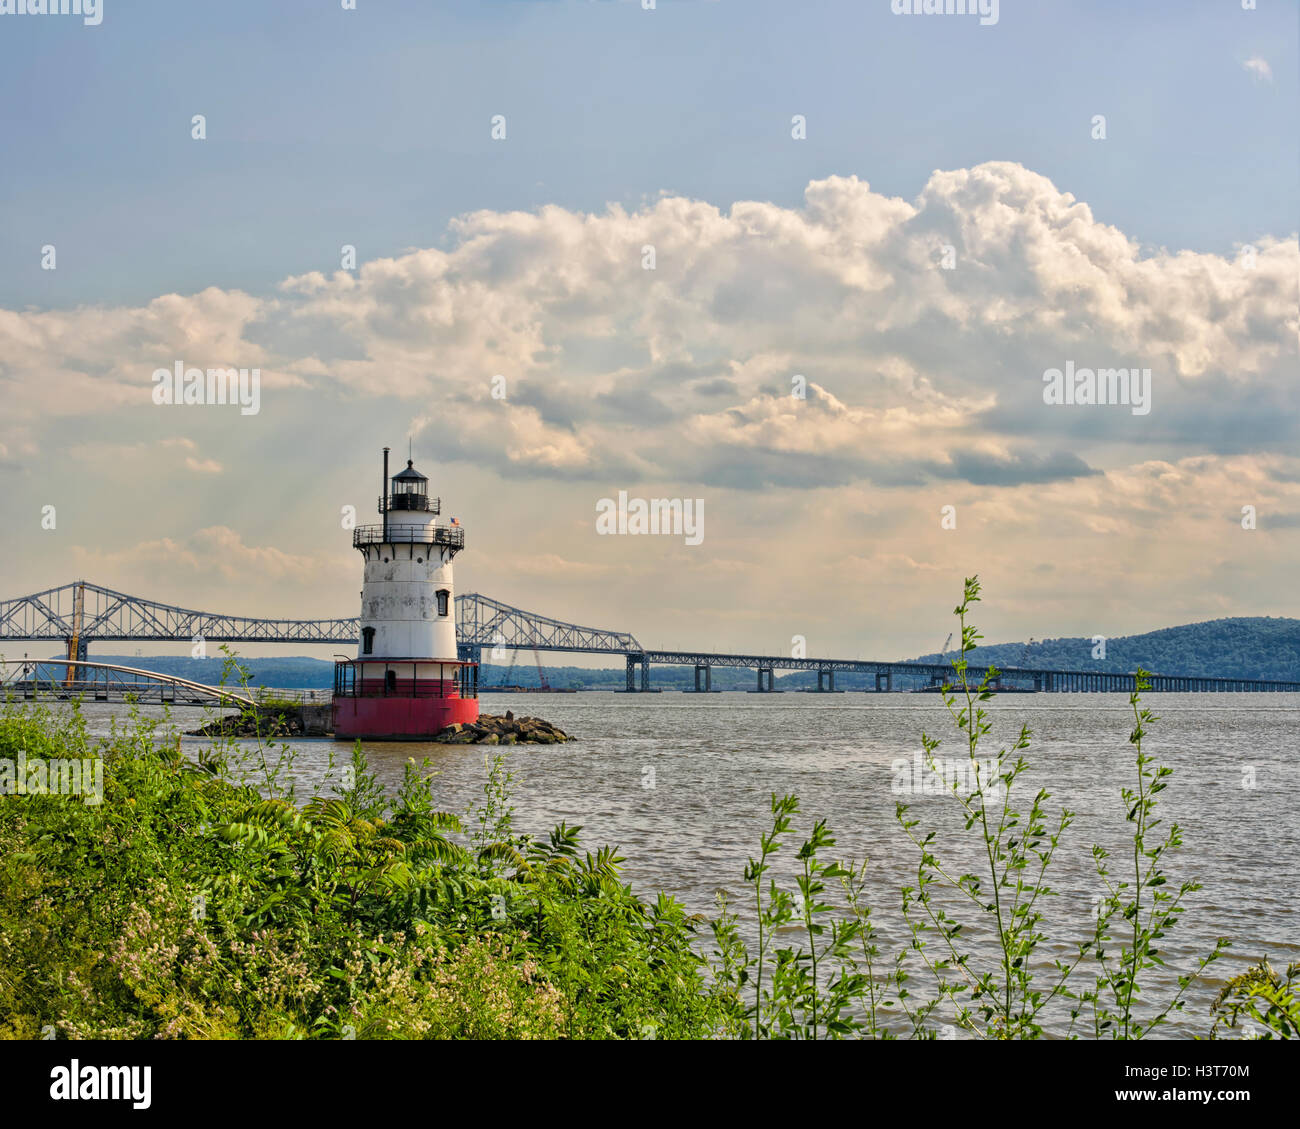 Tarrytown Lighthouse or Kingsland Point or Sleepy Hollow light house and Tappan Zee Bridge with cranes building new bridge before its 2019 demolition Stock Photo